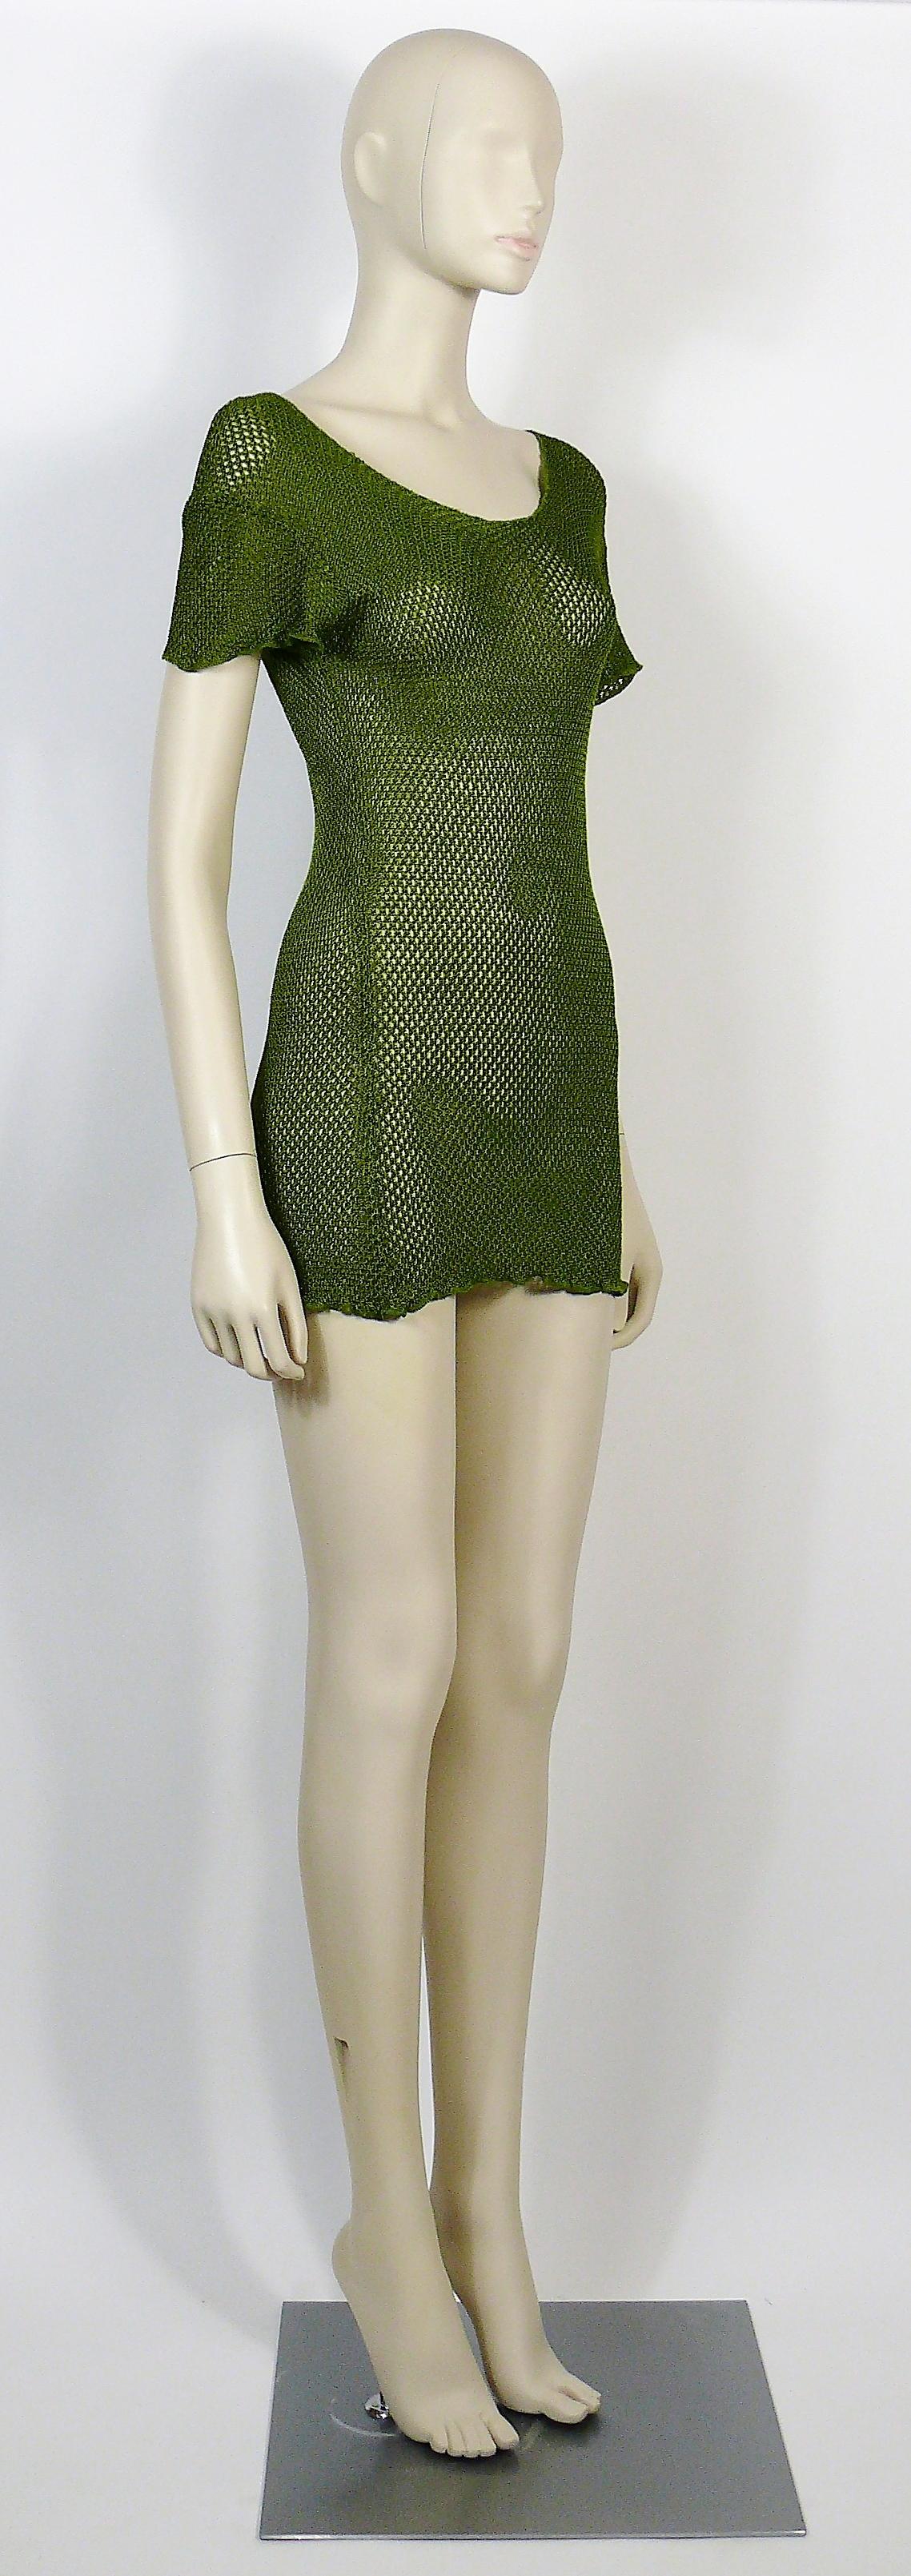 JEAN PAUL GAULTIER vintage 1990s green fishnet mini dress.

Label reads JUNIOR GAULTIER Made in Italy.

Size tag reads :52.
Please refer to measurements.

Composition tag reads : 98% Viscose / 2% Elastan.

Indicative measurements taken laid flat and